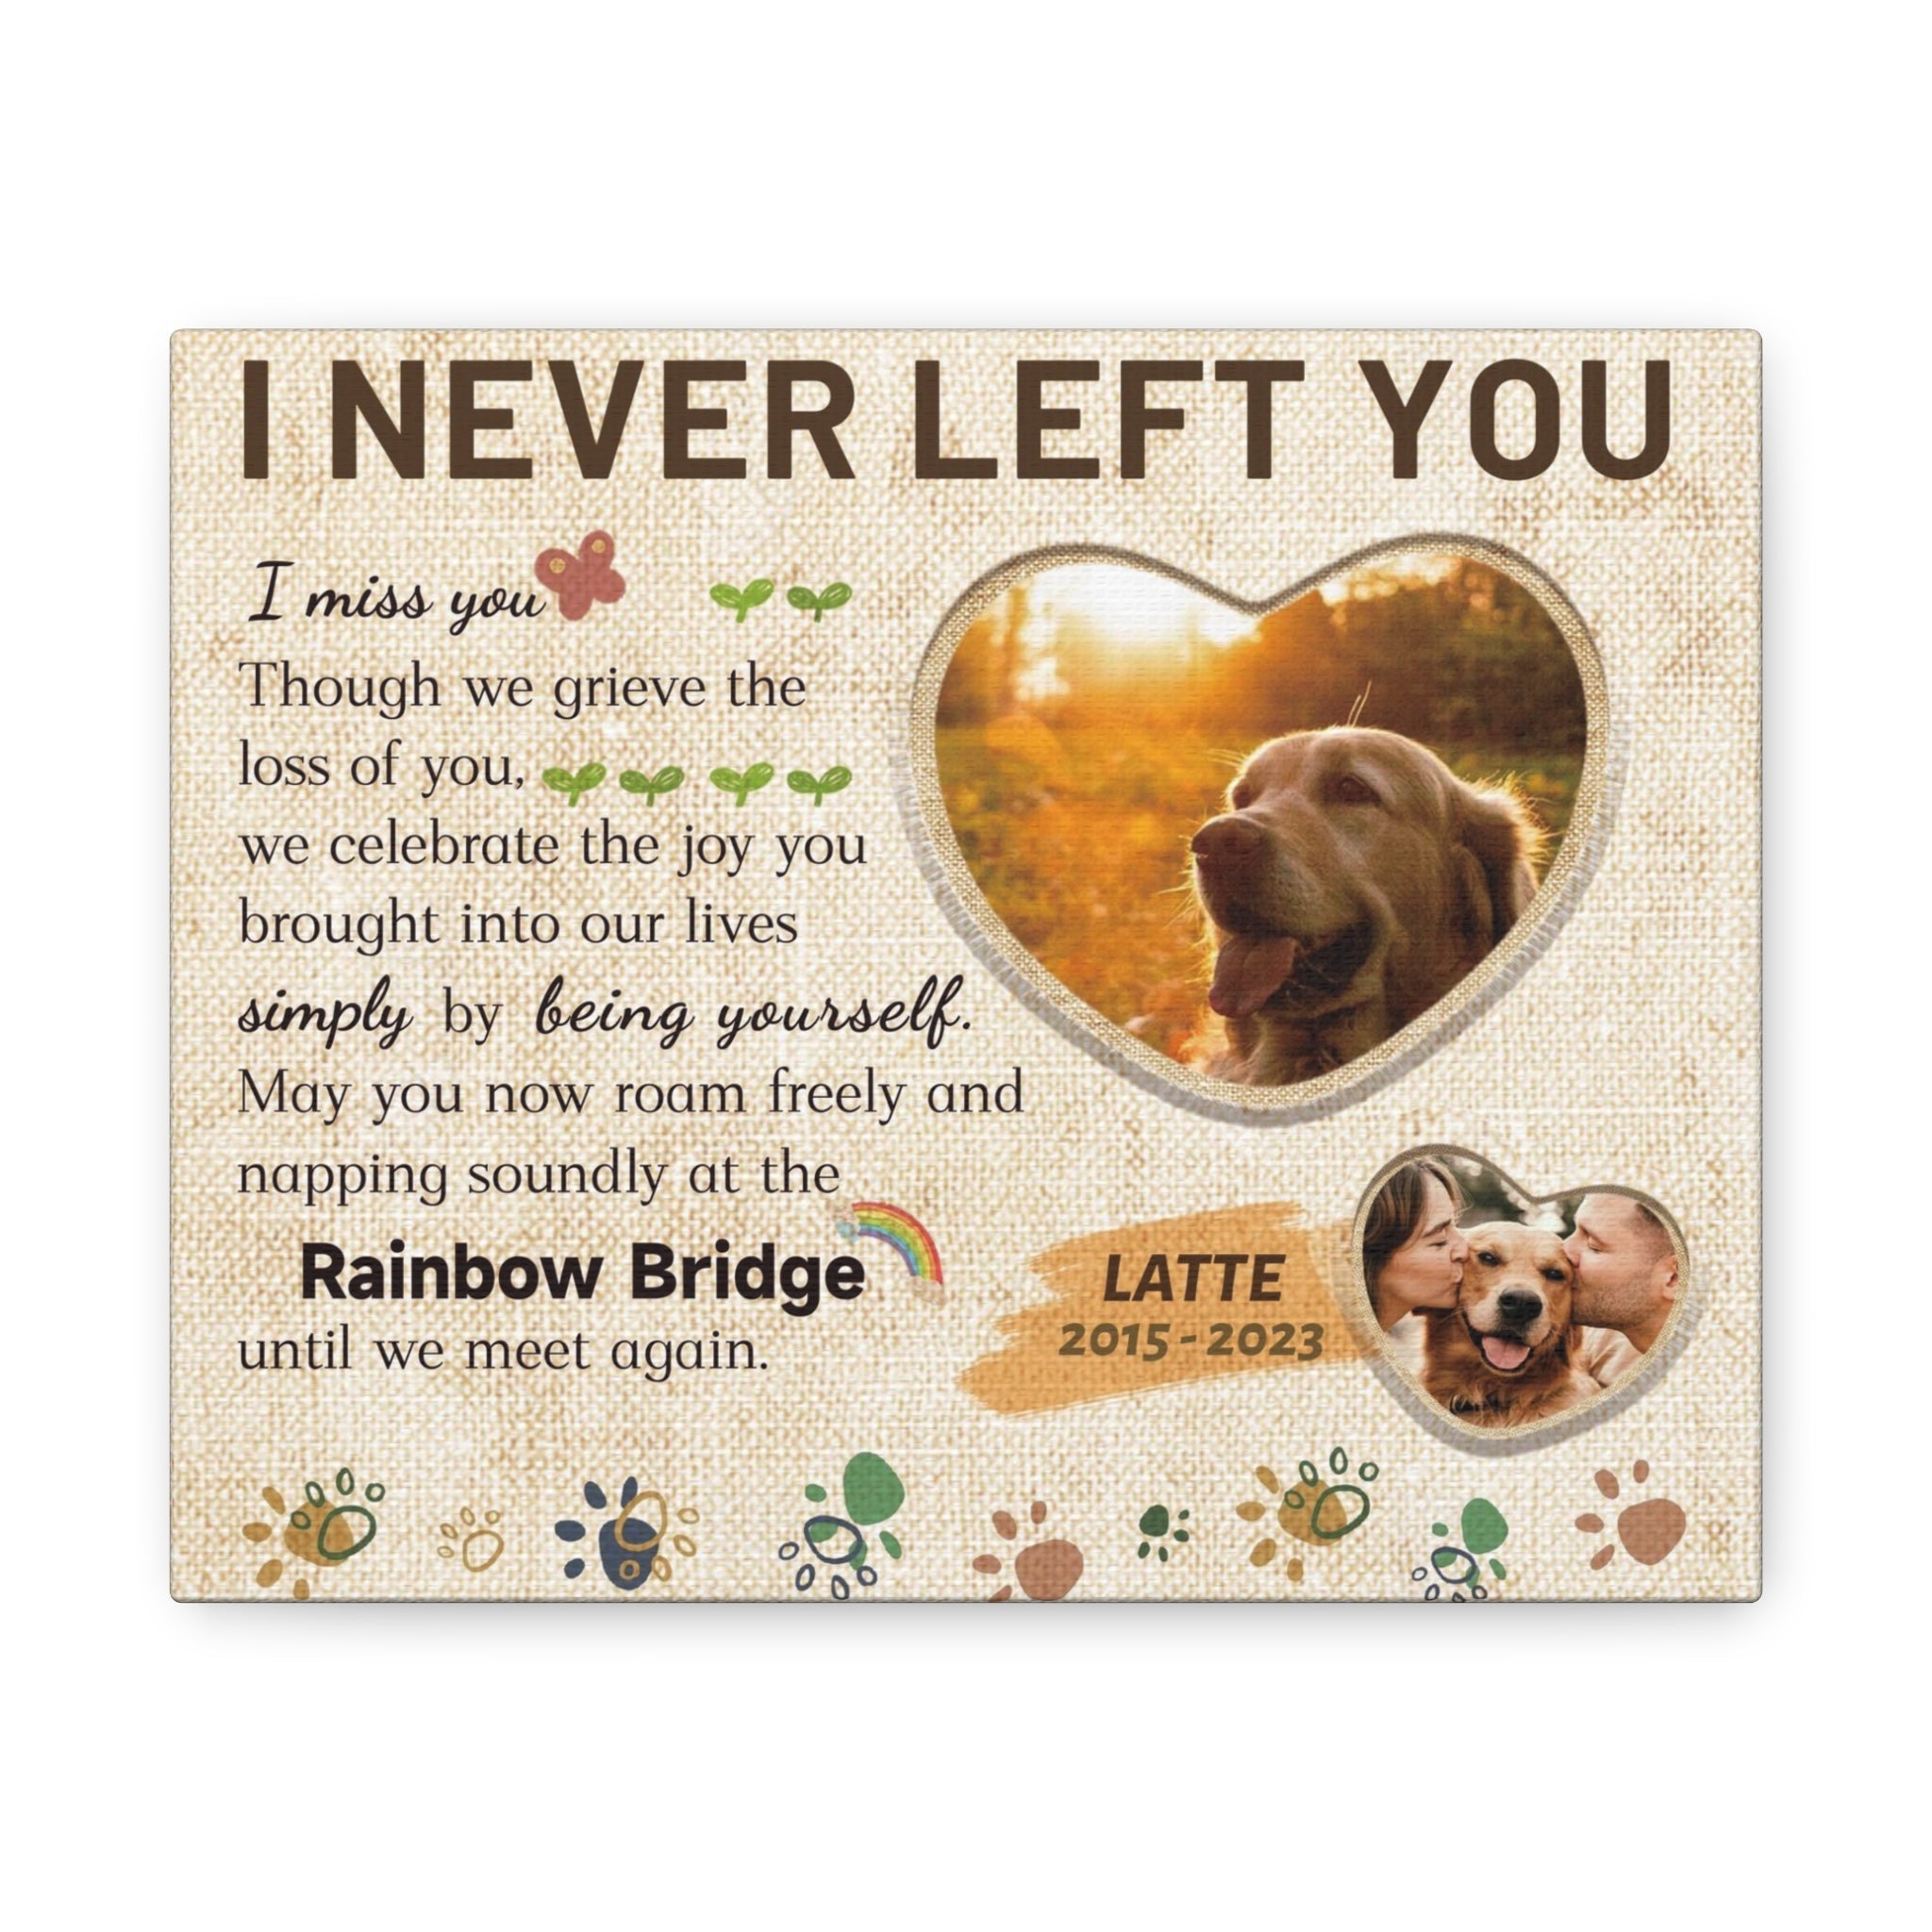 I Never Left You - Personalized Canvas Print Pet Memorial